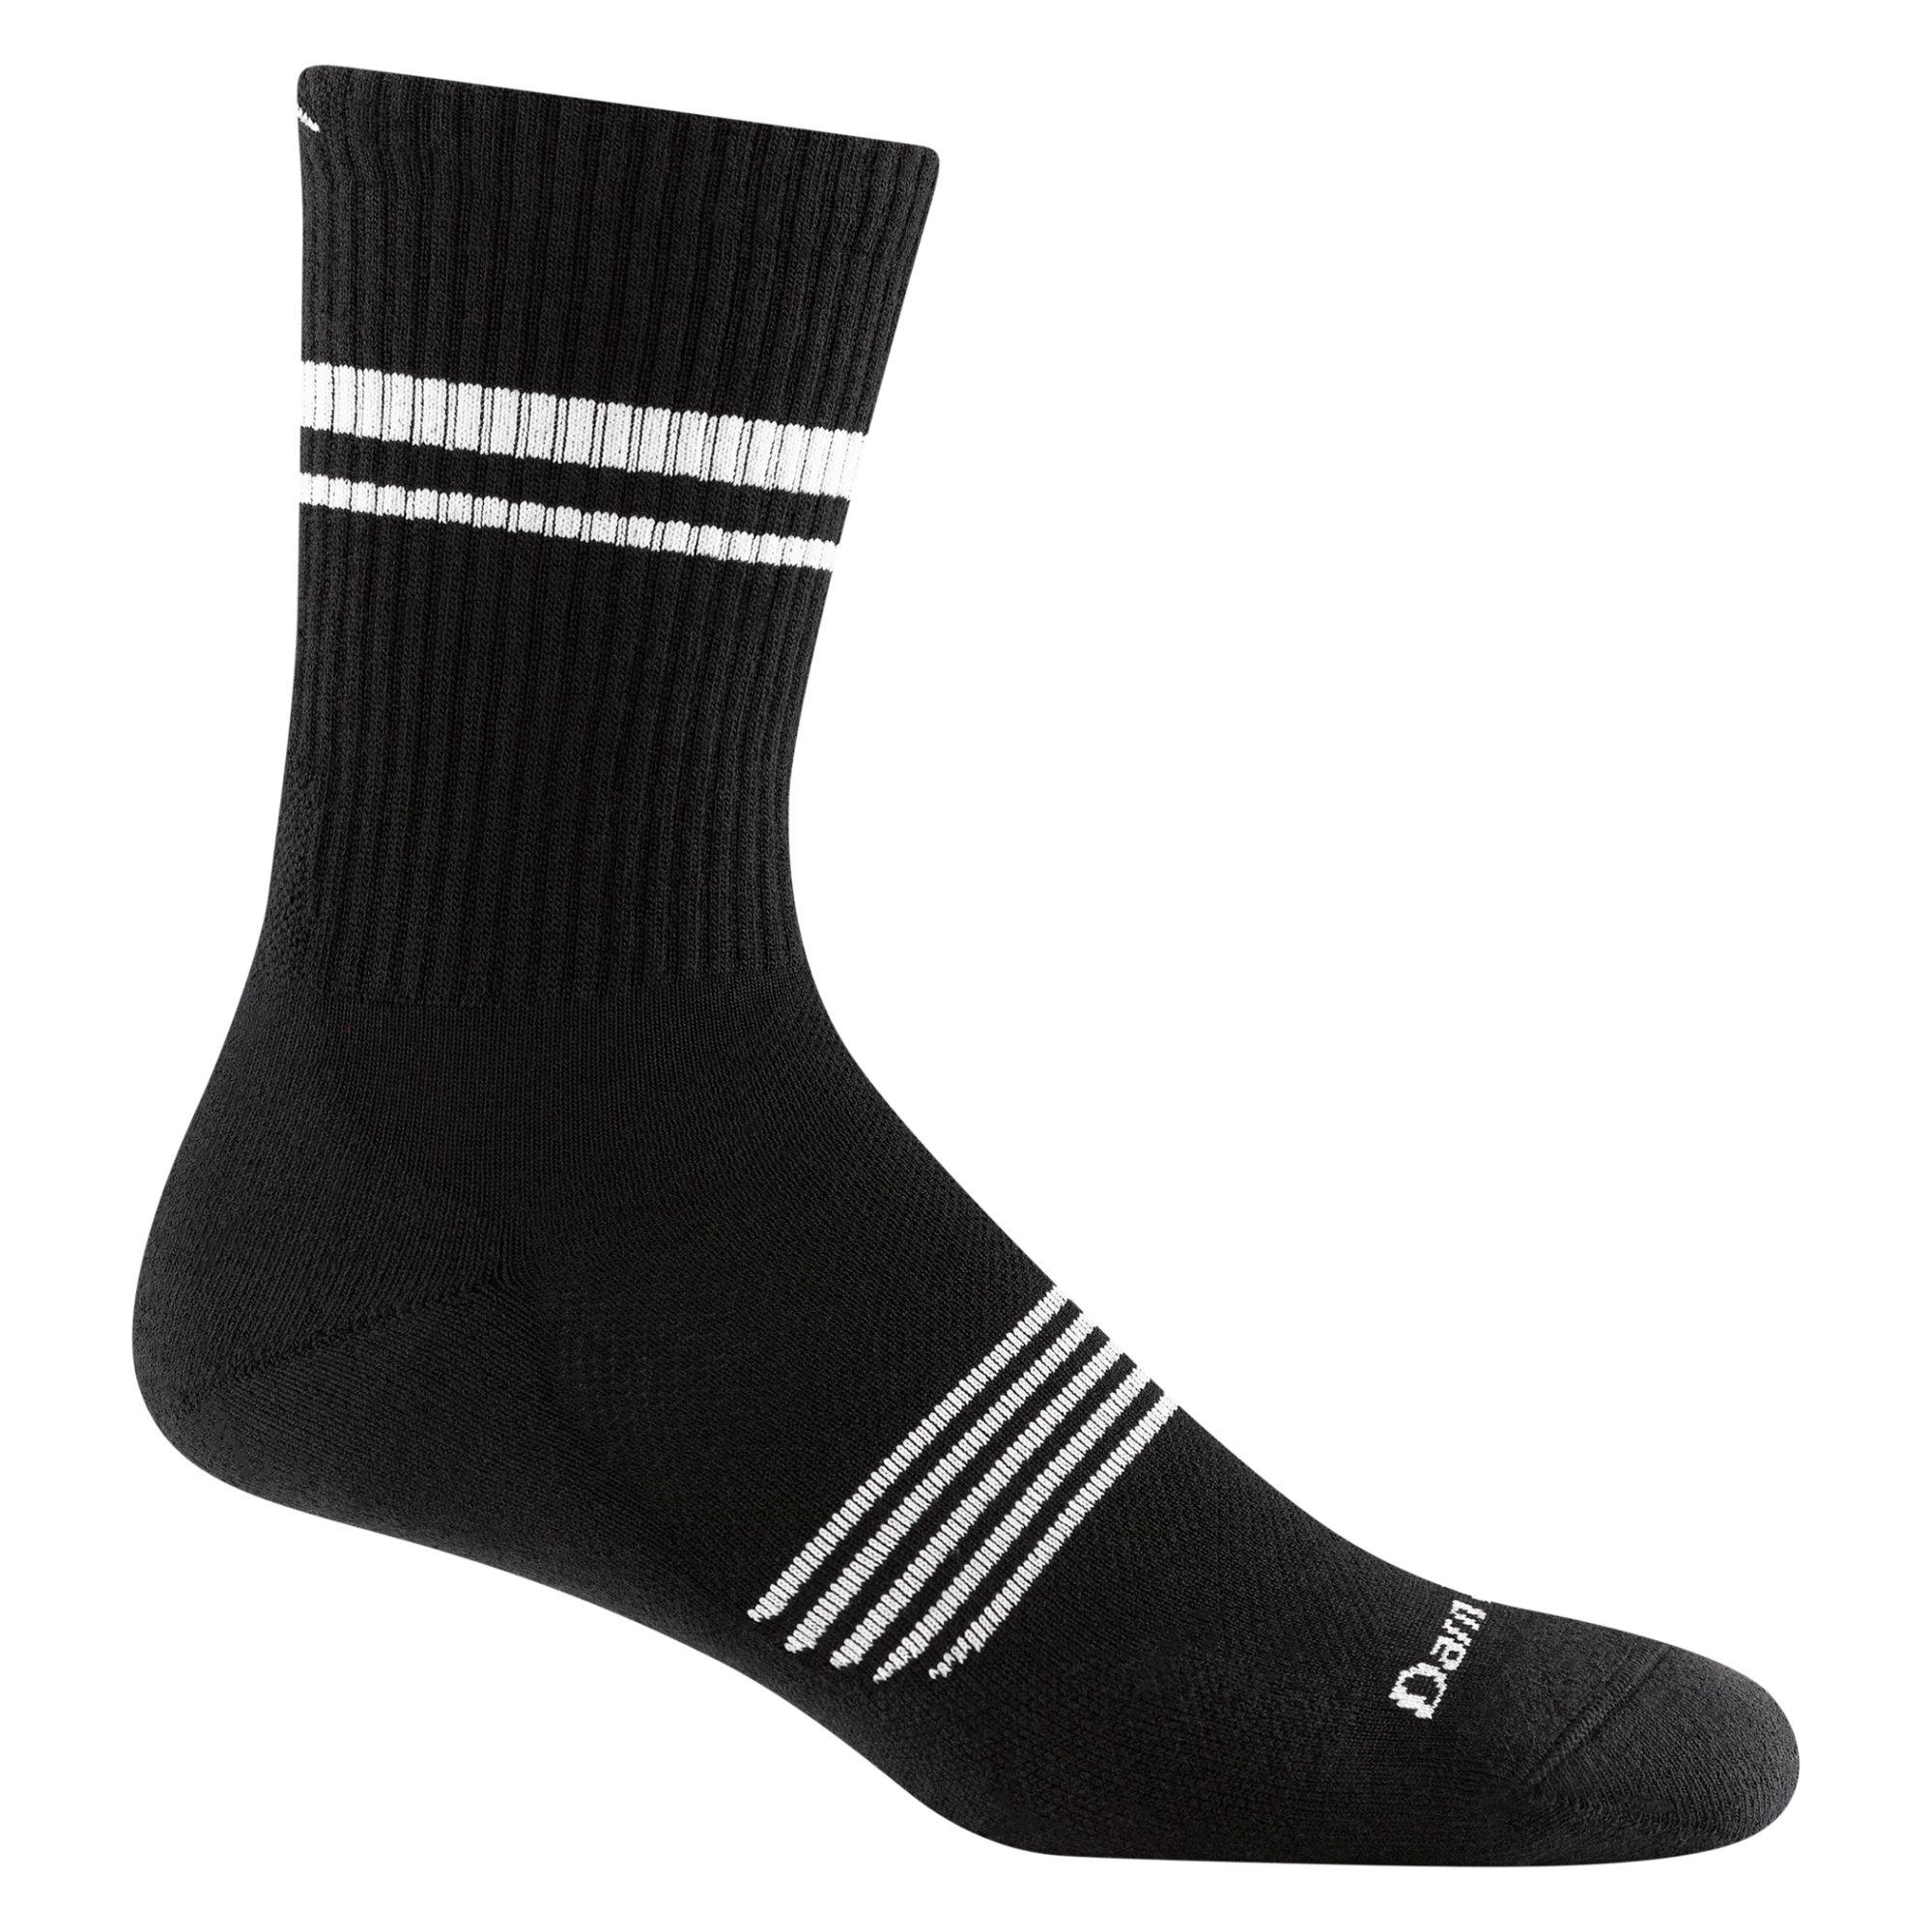 1118 men's element micro crew running sock in color black with white forefoot and calf striping and darn tough signature